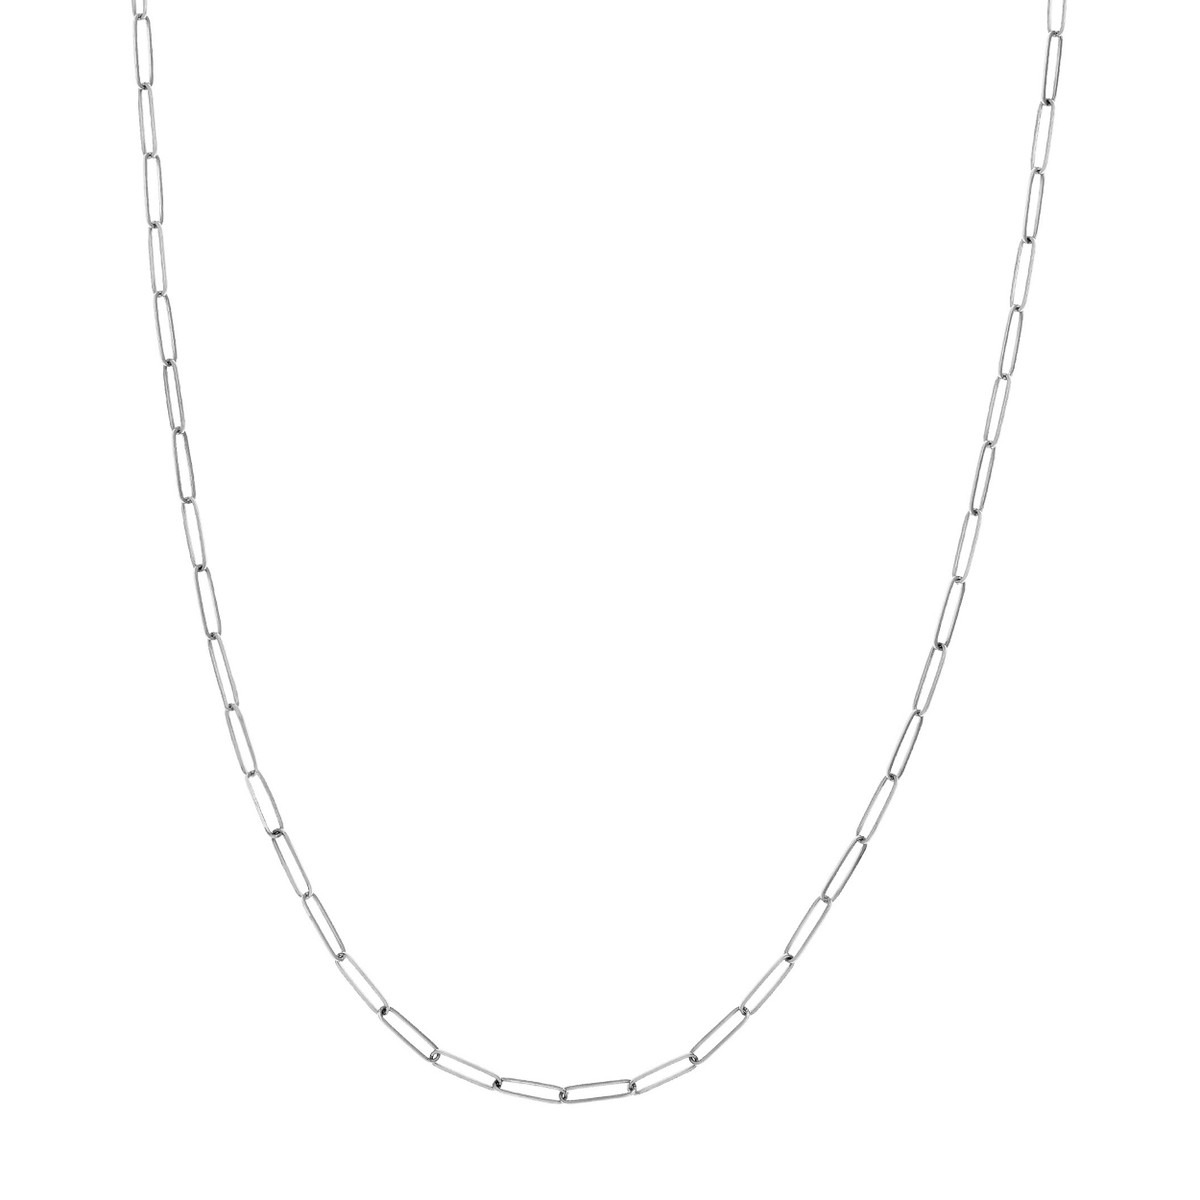 White Gold Elongated Paperclip Chain Necklace 2.6mm l 18 inches